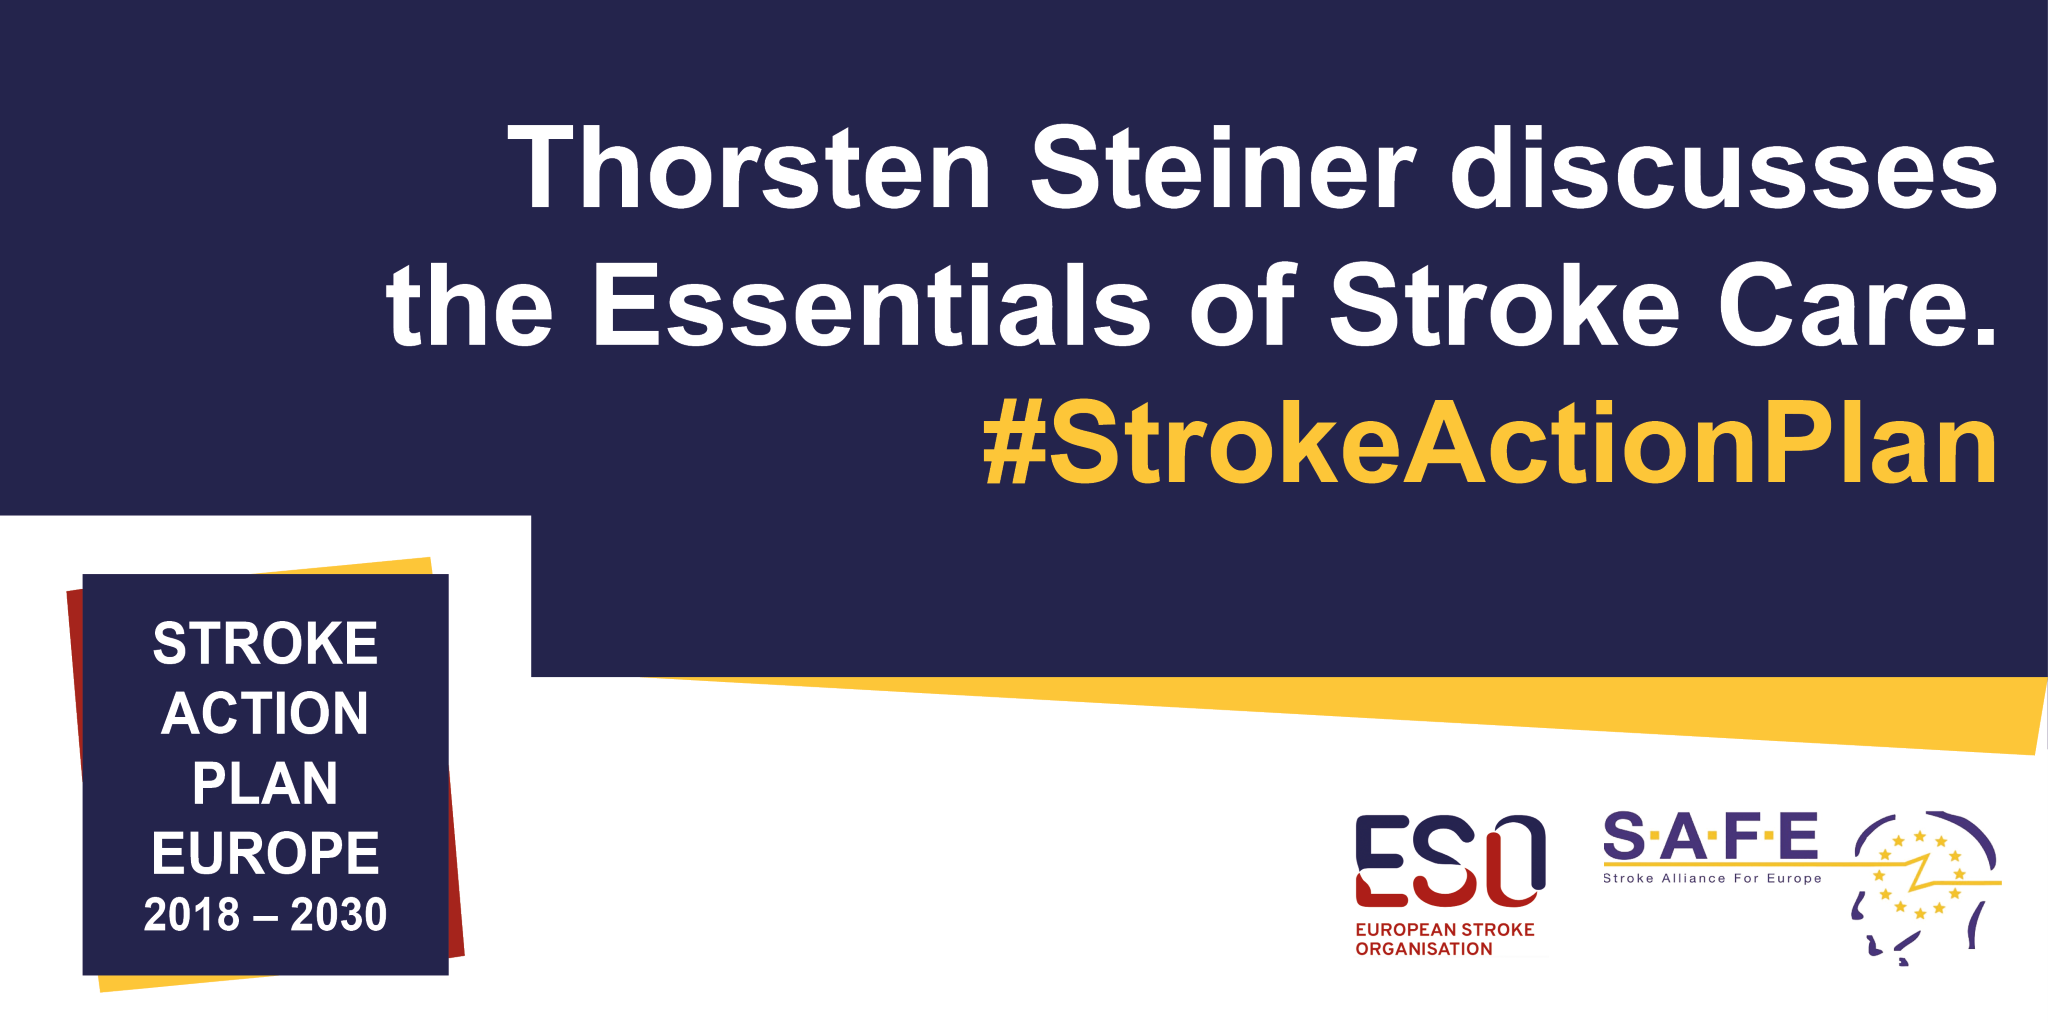 Professor Thorsten Steiner shares the importance of the Essentials of Stroke Care